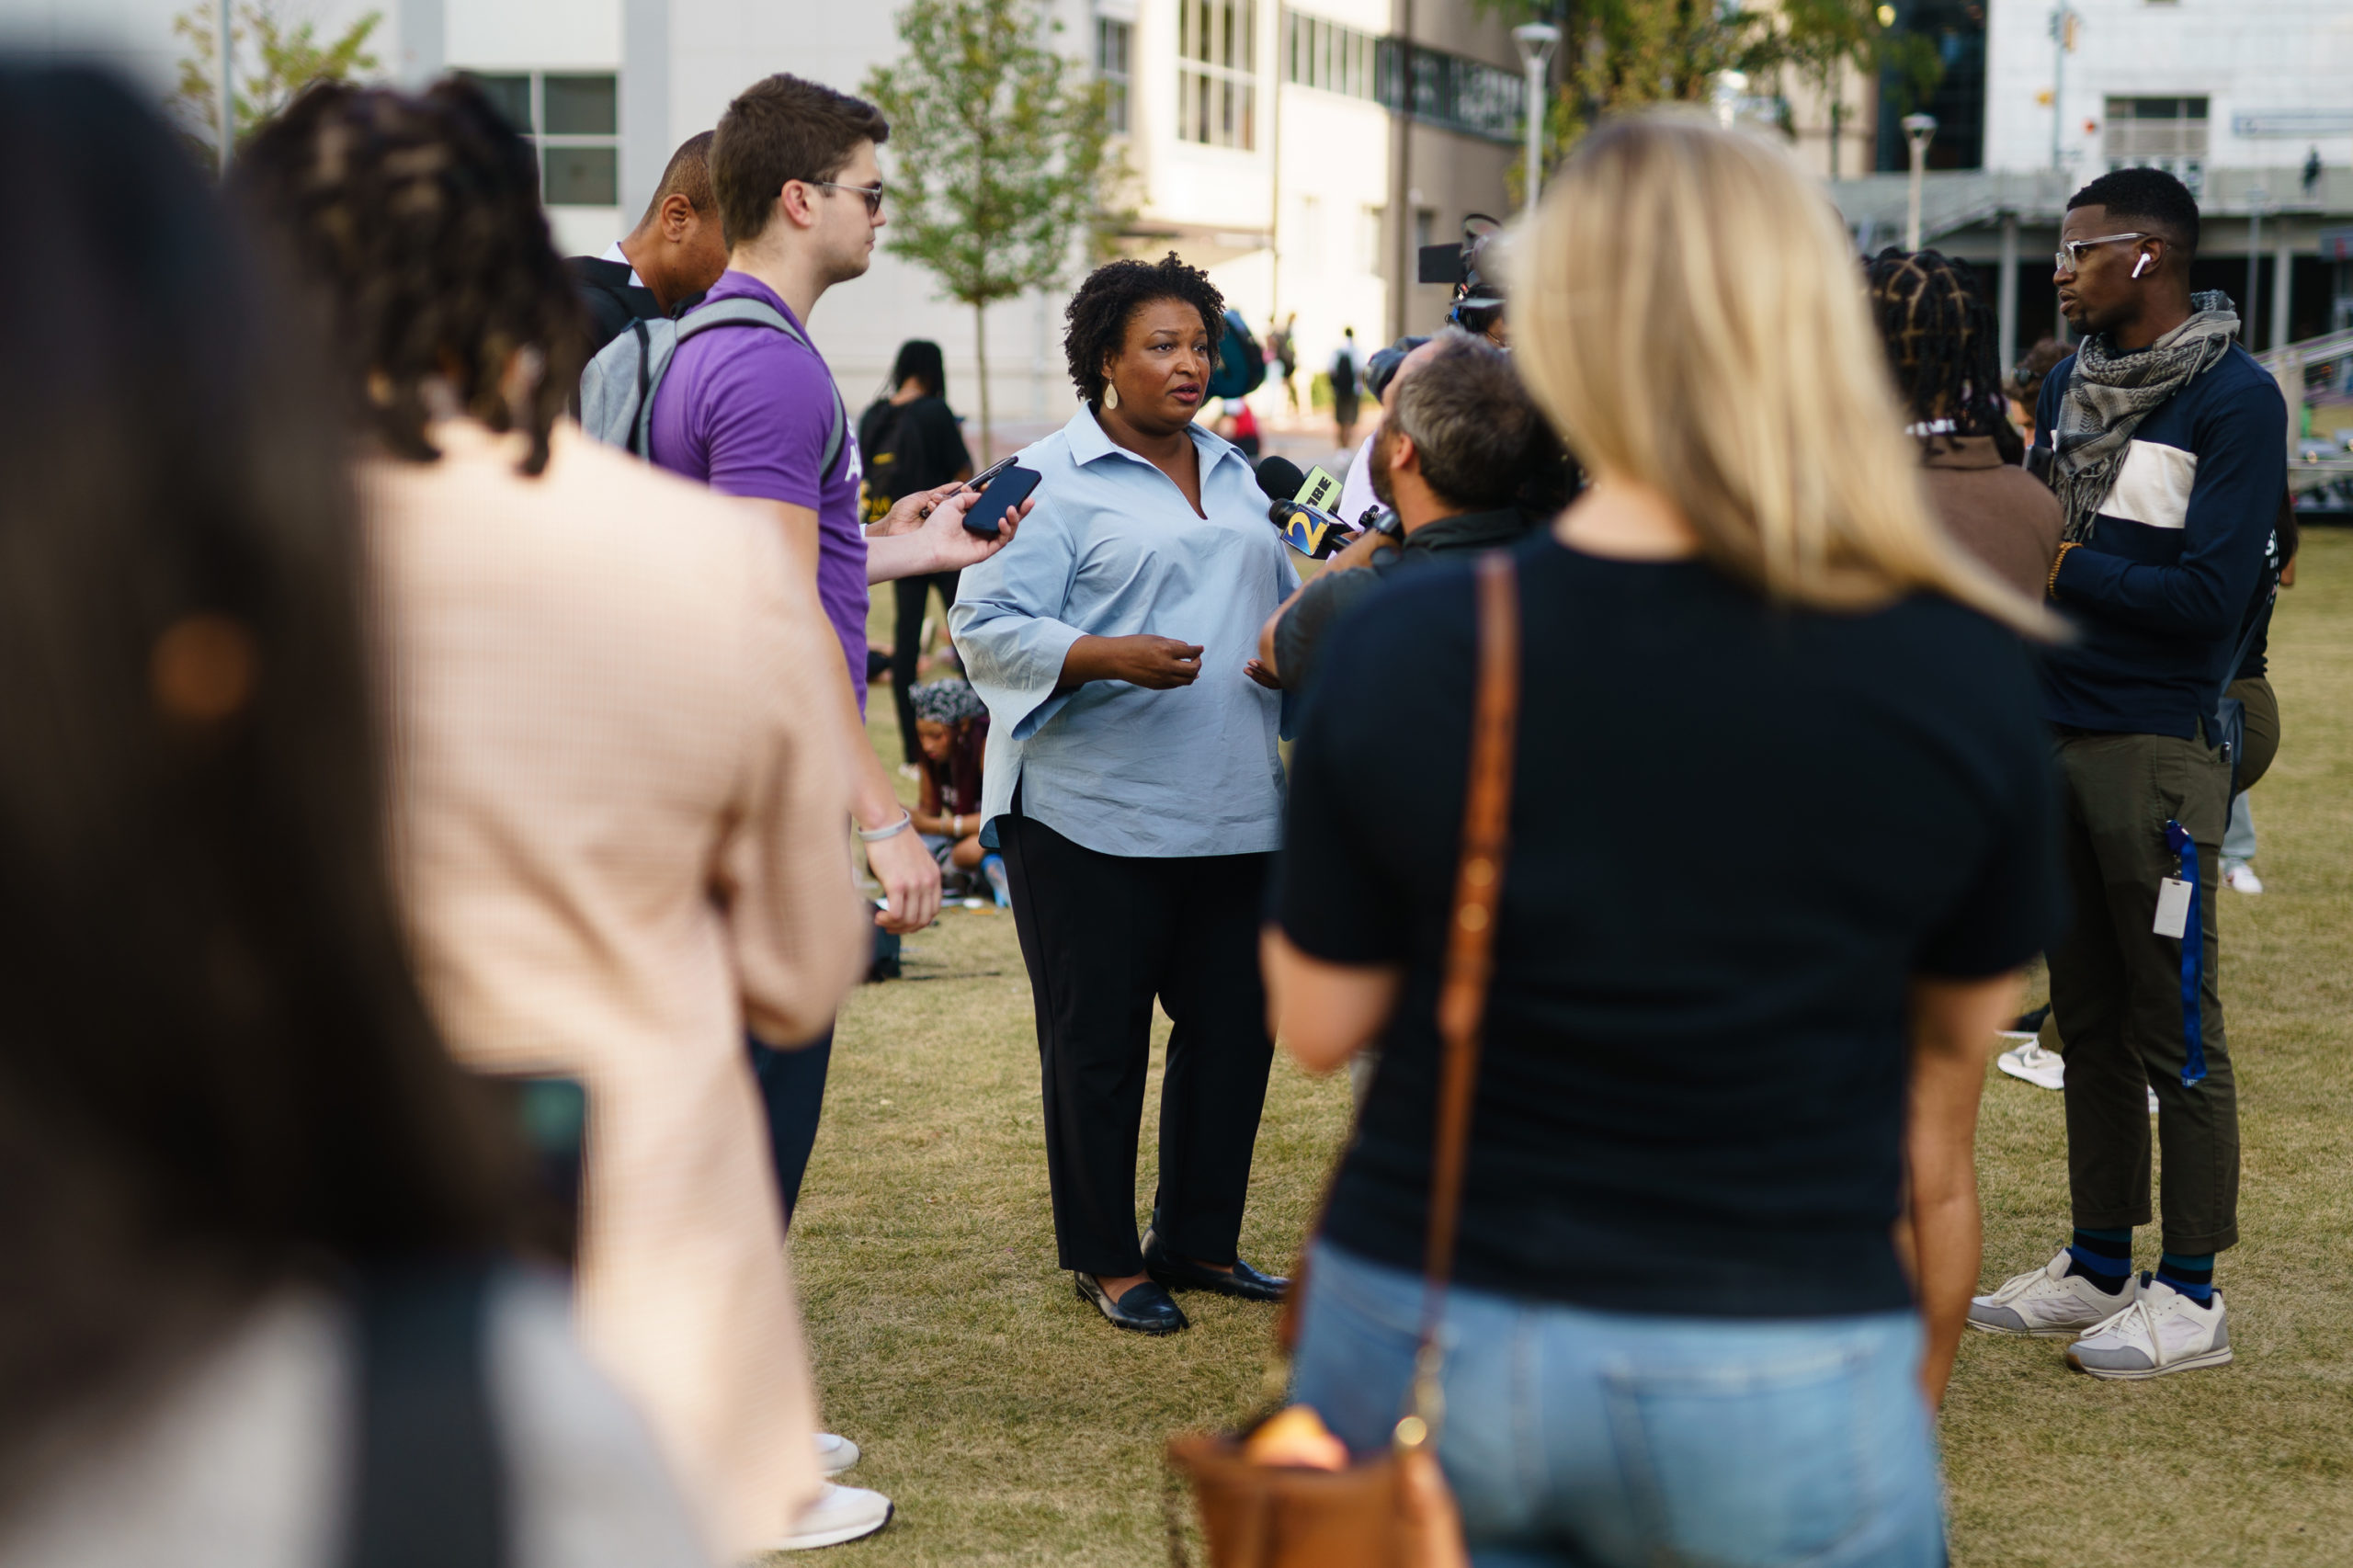 ATLANTA, GA - NOVEMBER 07: Democratic Georgia gubernatorial candidate Stacey Abrams speaks to the media after posing for photos with students and encouraging voting at Georgia State University on November 7, 2022 in Atlanta, Georgia. Photo by Elijah Nouvelage/Getty Images